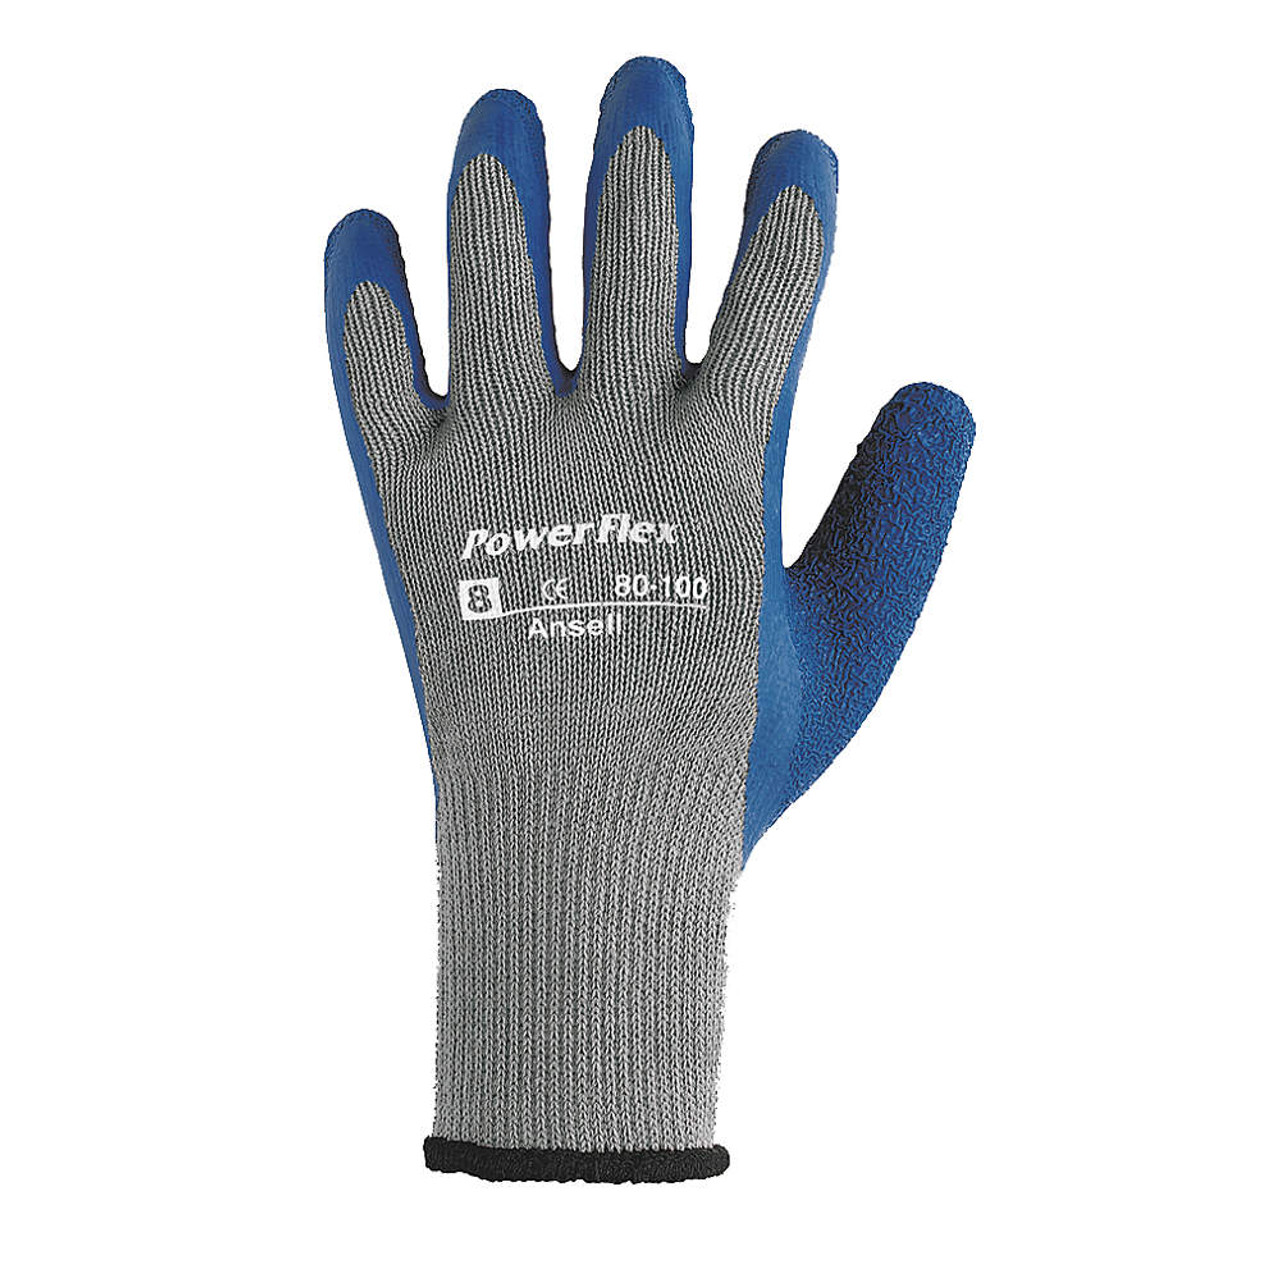 New Work Gloves Offer Advanced Fit, Safety and Comfort - Roofing